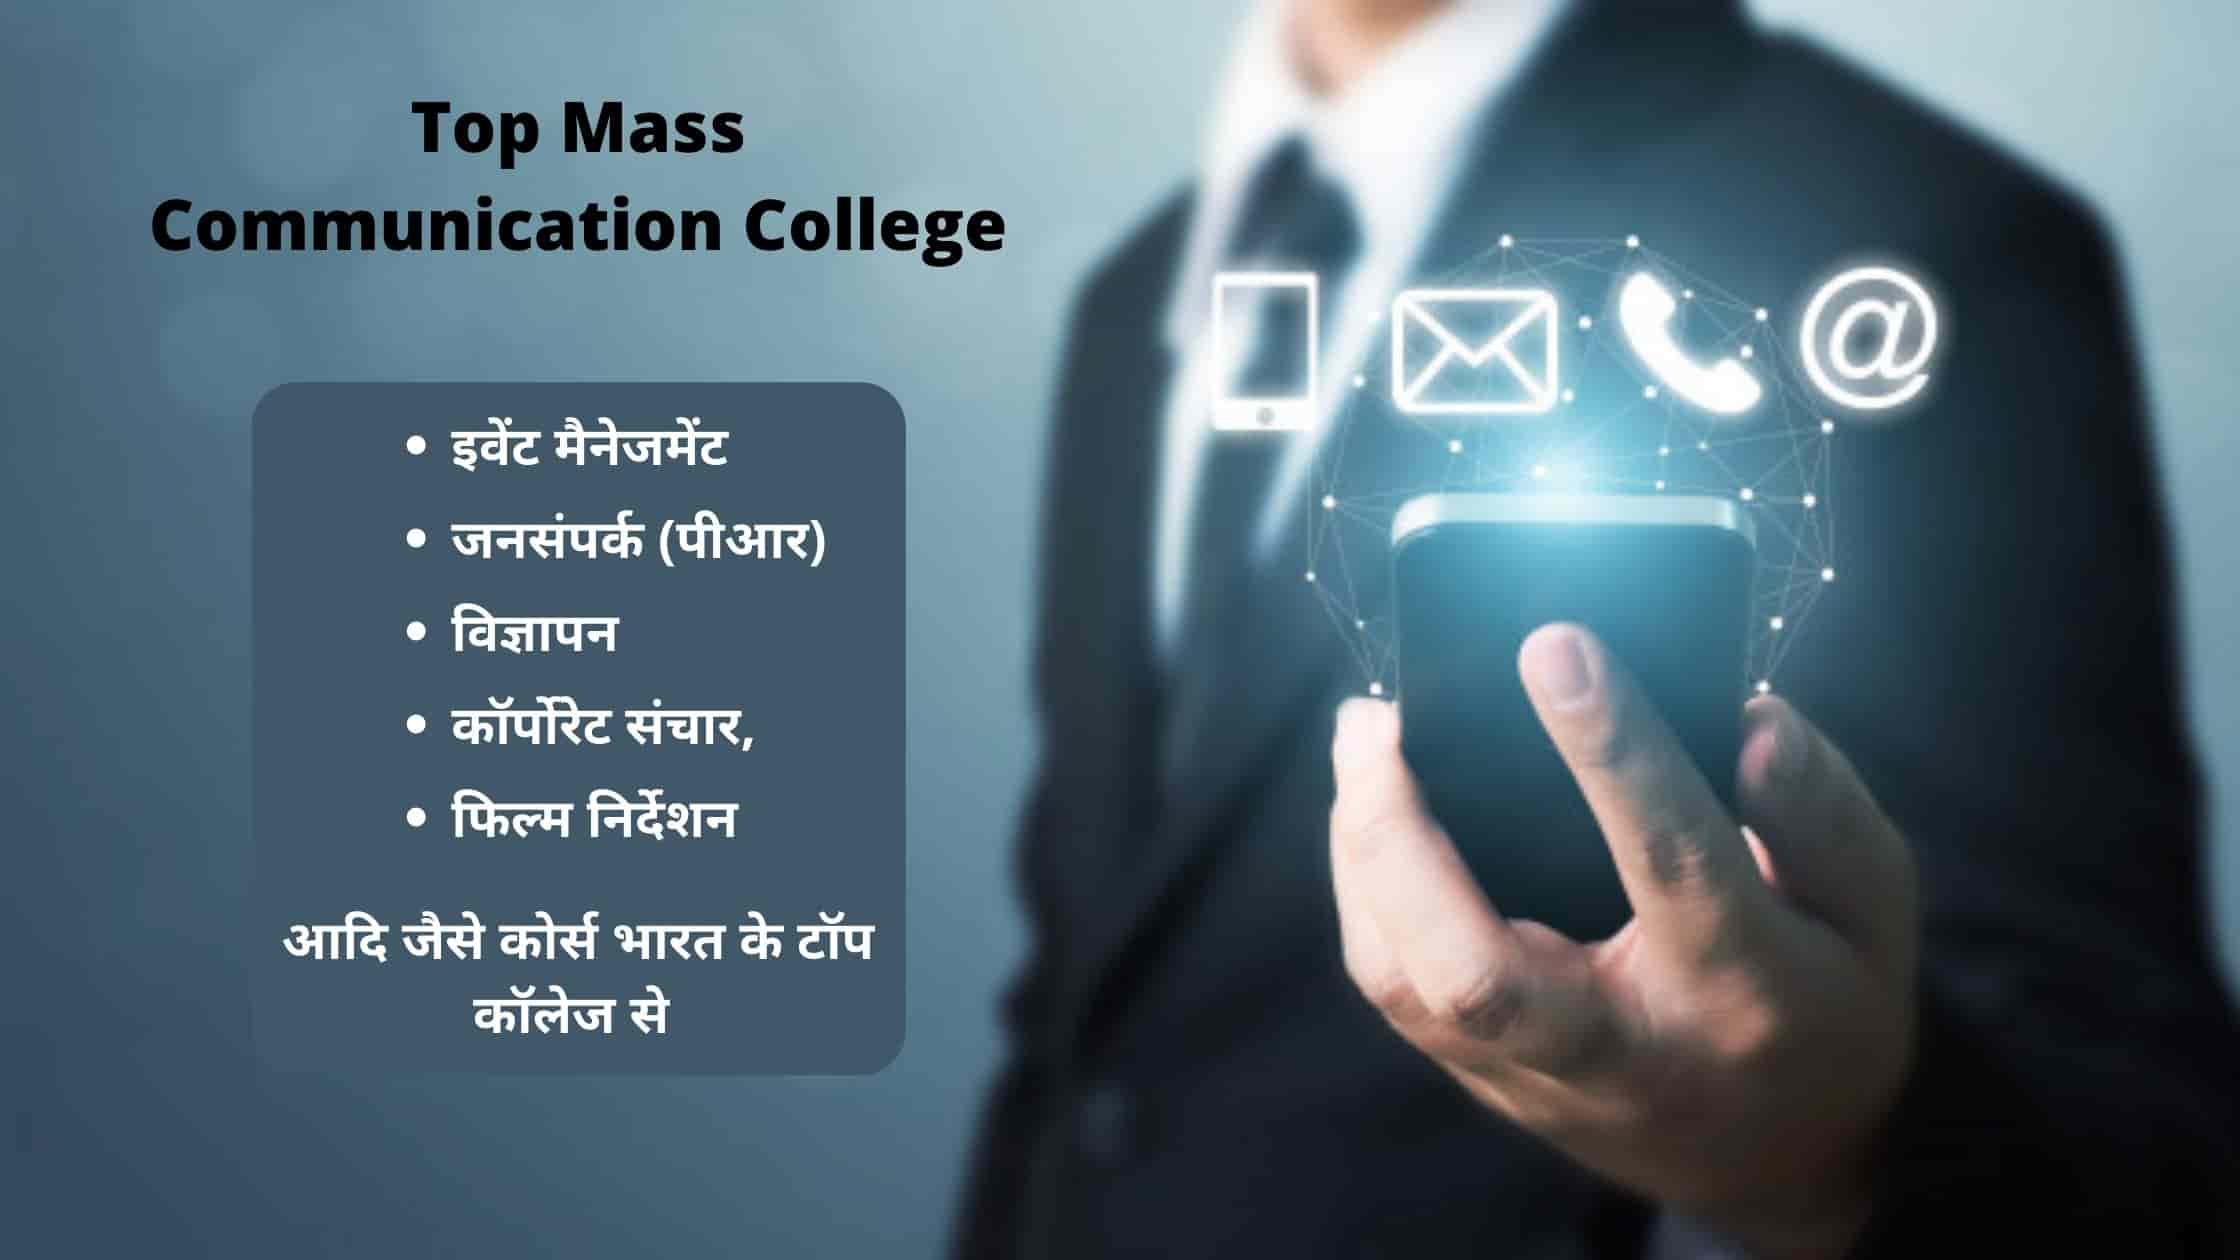 Top Mass Communication College in India